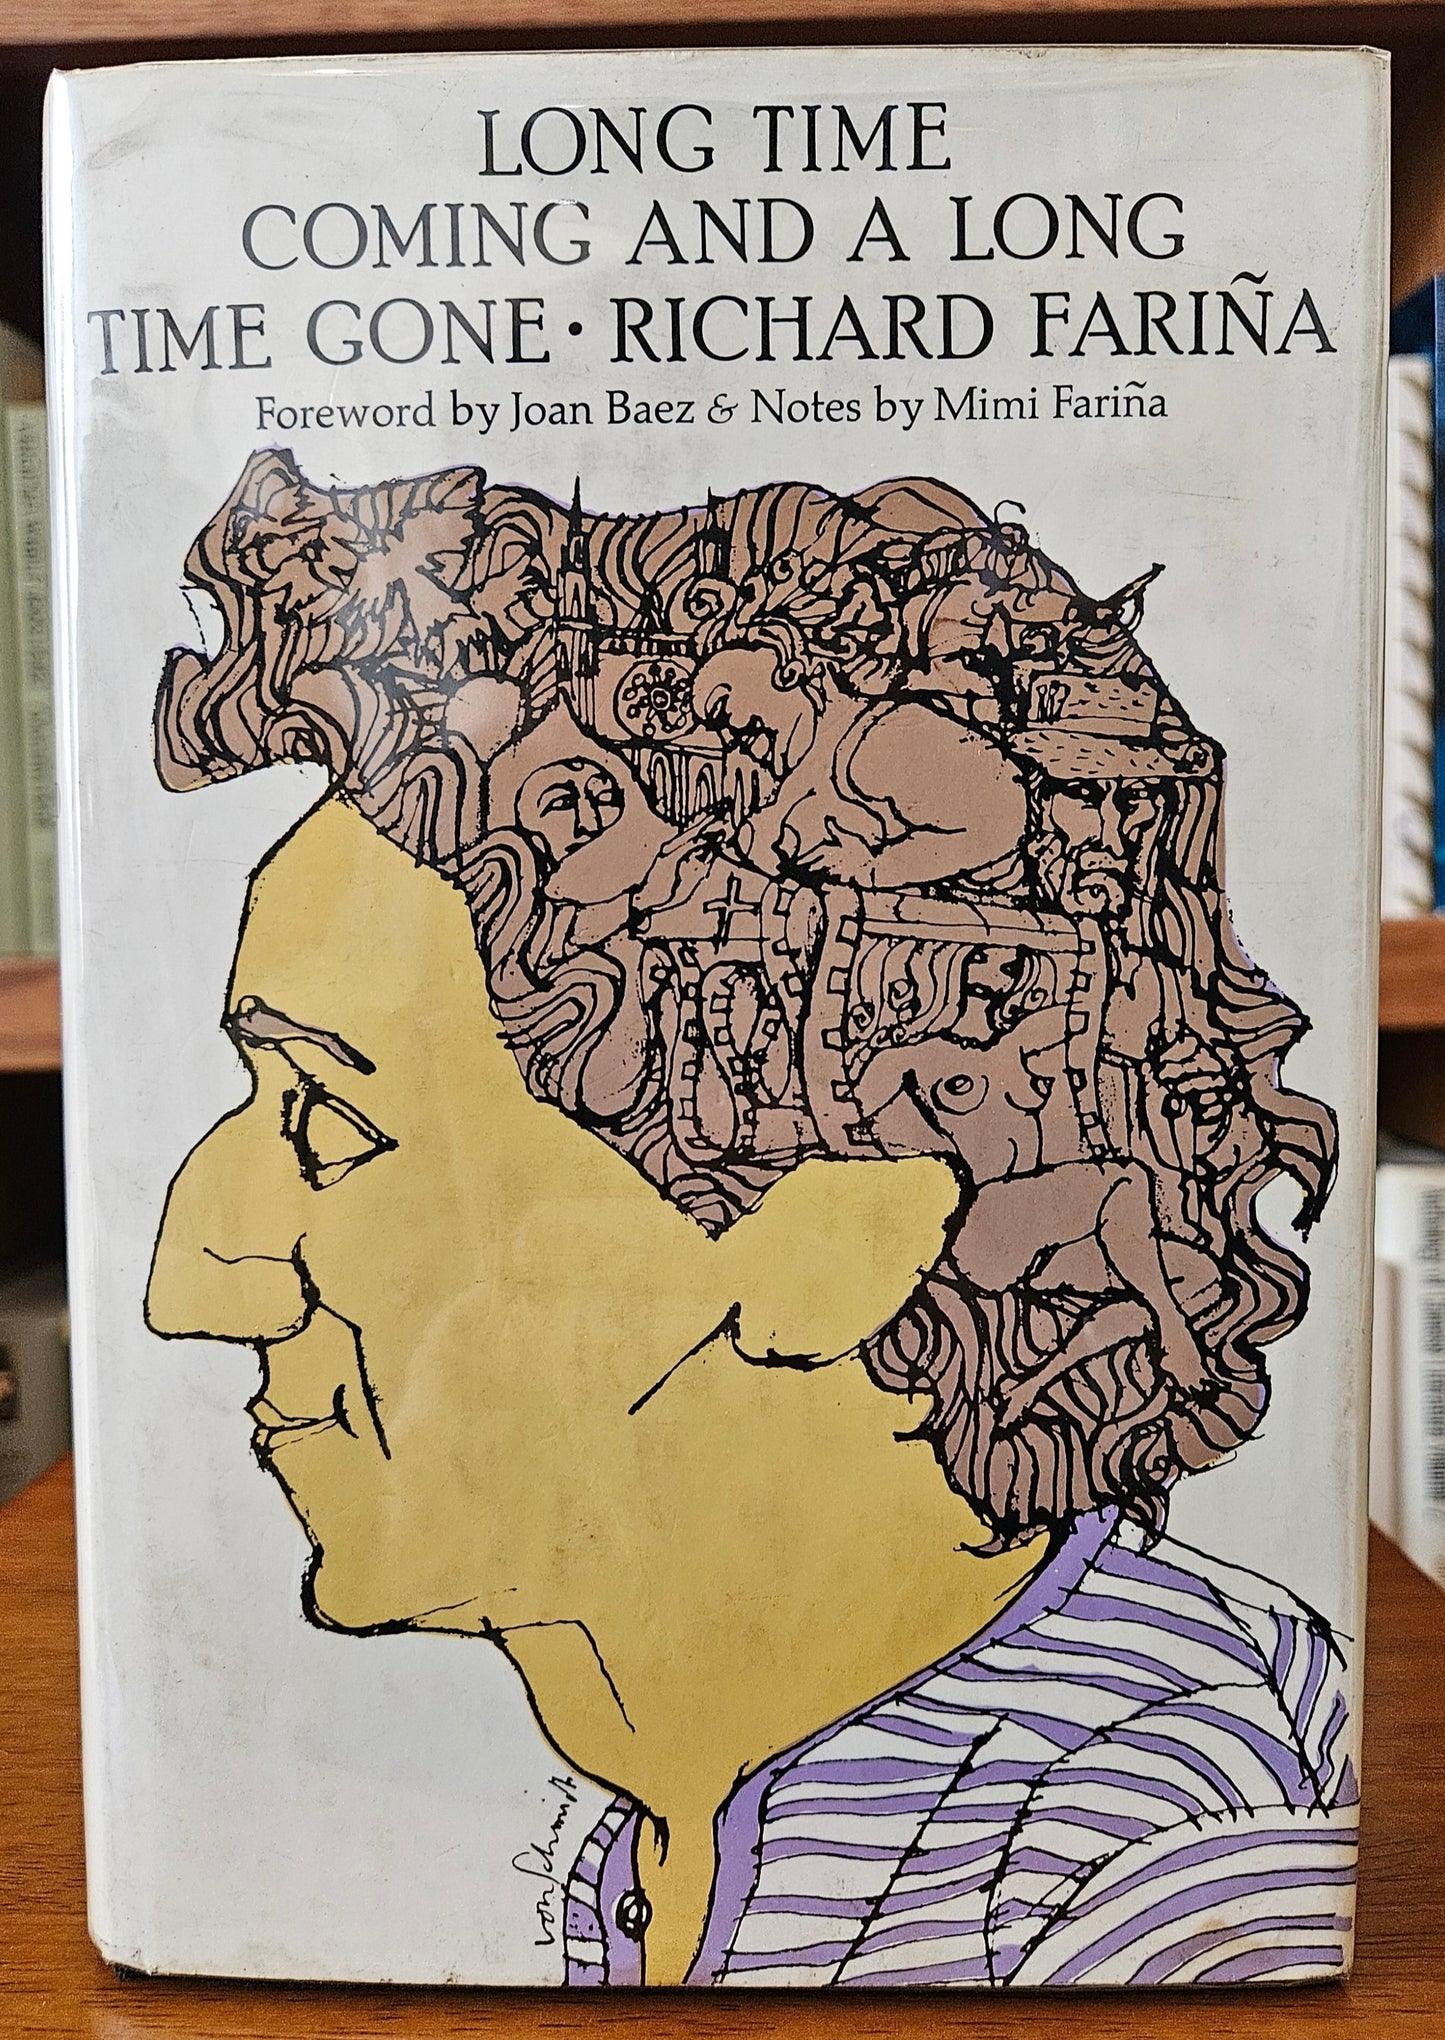 Richard Farina - Long Time Coming and a Long Time Gone